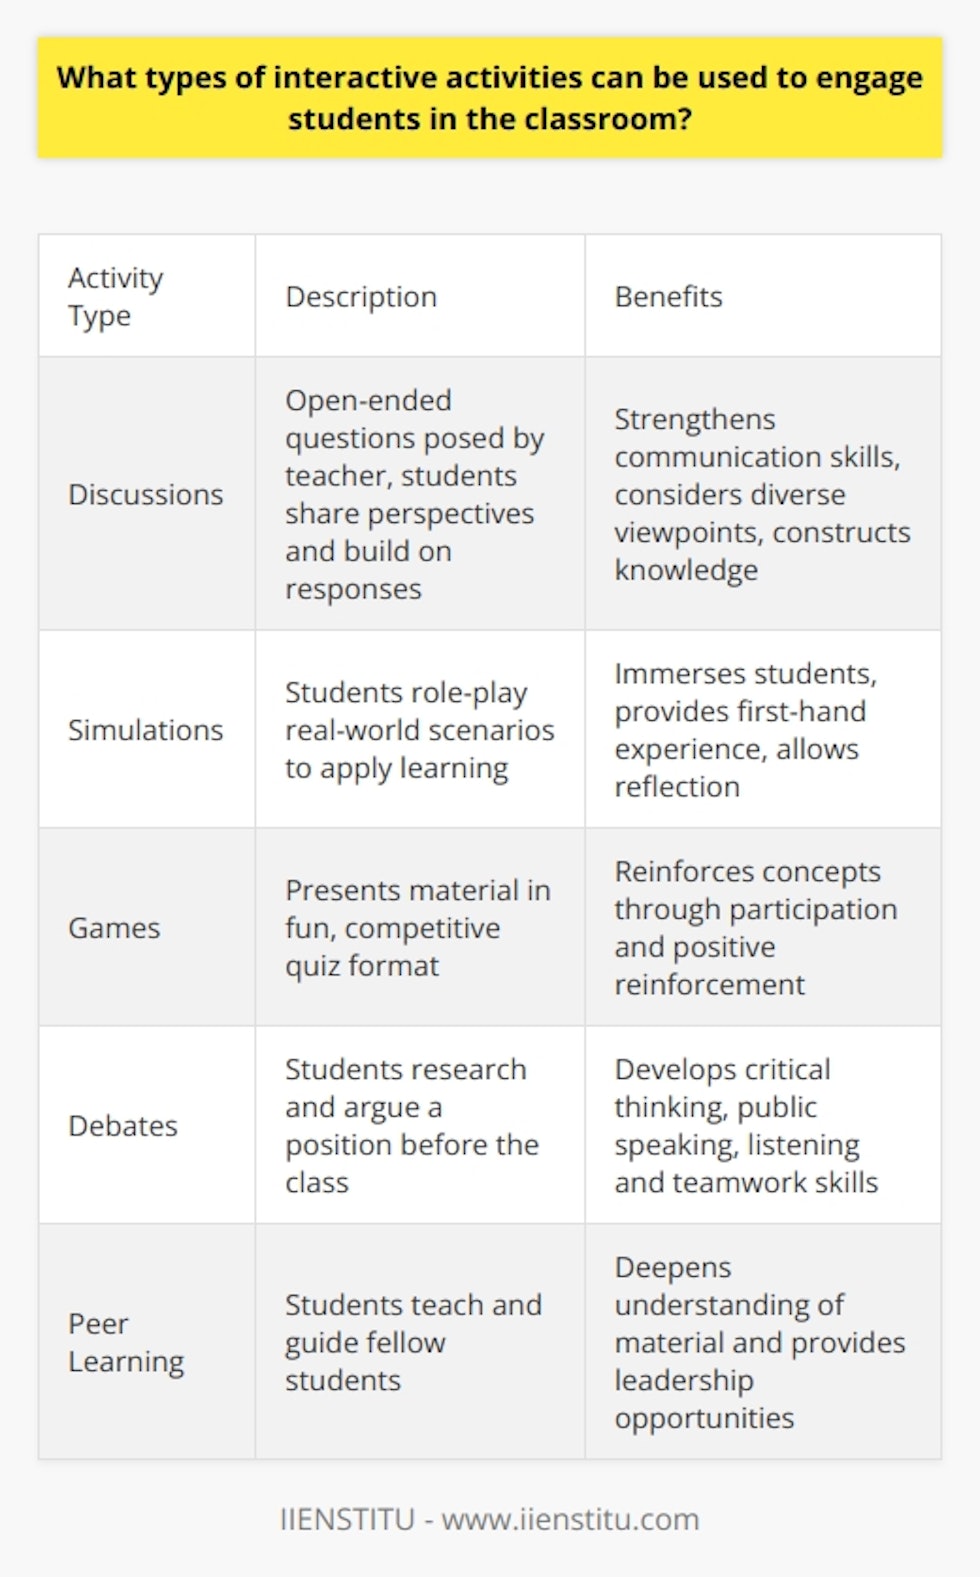 Here is some detailed content on interactive classroom activities:Engaging Students Through Interactive LearningActive learning activities allow students to fully participate in the learning process. When students are engaged, they retain more information and develop critical thinking skills. Teachers can incorporate interactive methods to create dynamic lessons that motivate students. DiscussionsClass discussions encourage students to articulate their ideas and respond to others. The teacher poses open-ended questions about the material. Students share perspectives, ask clarifying questions, and build on responses. Discussions help students strengthen communication abilities, consider diverse viewpoints, and construct knowledge together.SimulationsSimulations place students in real-world scenarios to apply their learning. Reenacting historical events, conducting mock trials, or acting out literature scenes brings lessons to life. Students are immersed in role-play, gaining first-hand experience of concepts. Debriefing after simulations allows reflection on what was learned.GamesEducational games present material in a fun, competitive format. Quiz-based games like Kahoot allow teams to demonstrate their knowledge. Other games have students interact with content, like completing a puzzle about the parts of a cell. Games reinforce concepts through active participation and positive reinforcement.Debates Debates teach argumentation, public speaking, and critical thinking skills. Students research evidence on a topic and articulate their position before the class. Addressing counterarguments strengthens their ability to reason. Debates also foster listening and teamwork as students collaborate to build their case.Peer LearningPeer learning activities have students teach and guide fellow students. Think-pair-share, for example, has pairs discuss a prompt before addressing the class. Reciprocal teaching assigns students to lead discussions on assigned readings. Peer learning deepens understanding of material and provides leadership opportunities.Incorporating discussions, simulations, games, debates, and peer-led activities brings lessons to life. Interaction motivates students to take charge of their learning. Activities like these make school engaging and impactful for students.